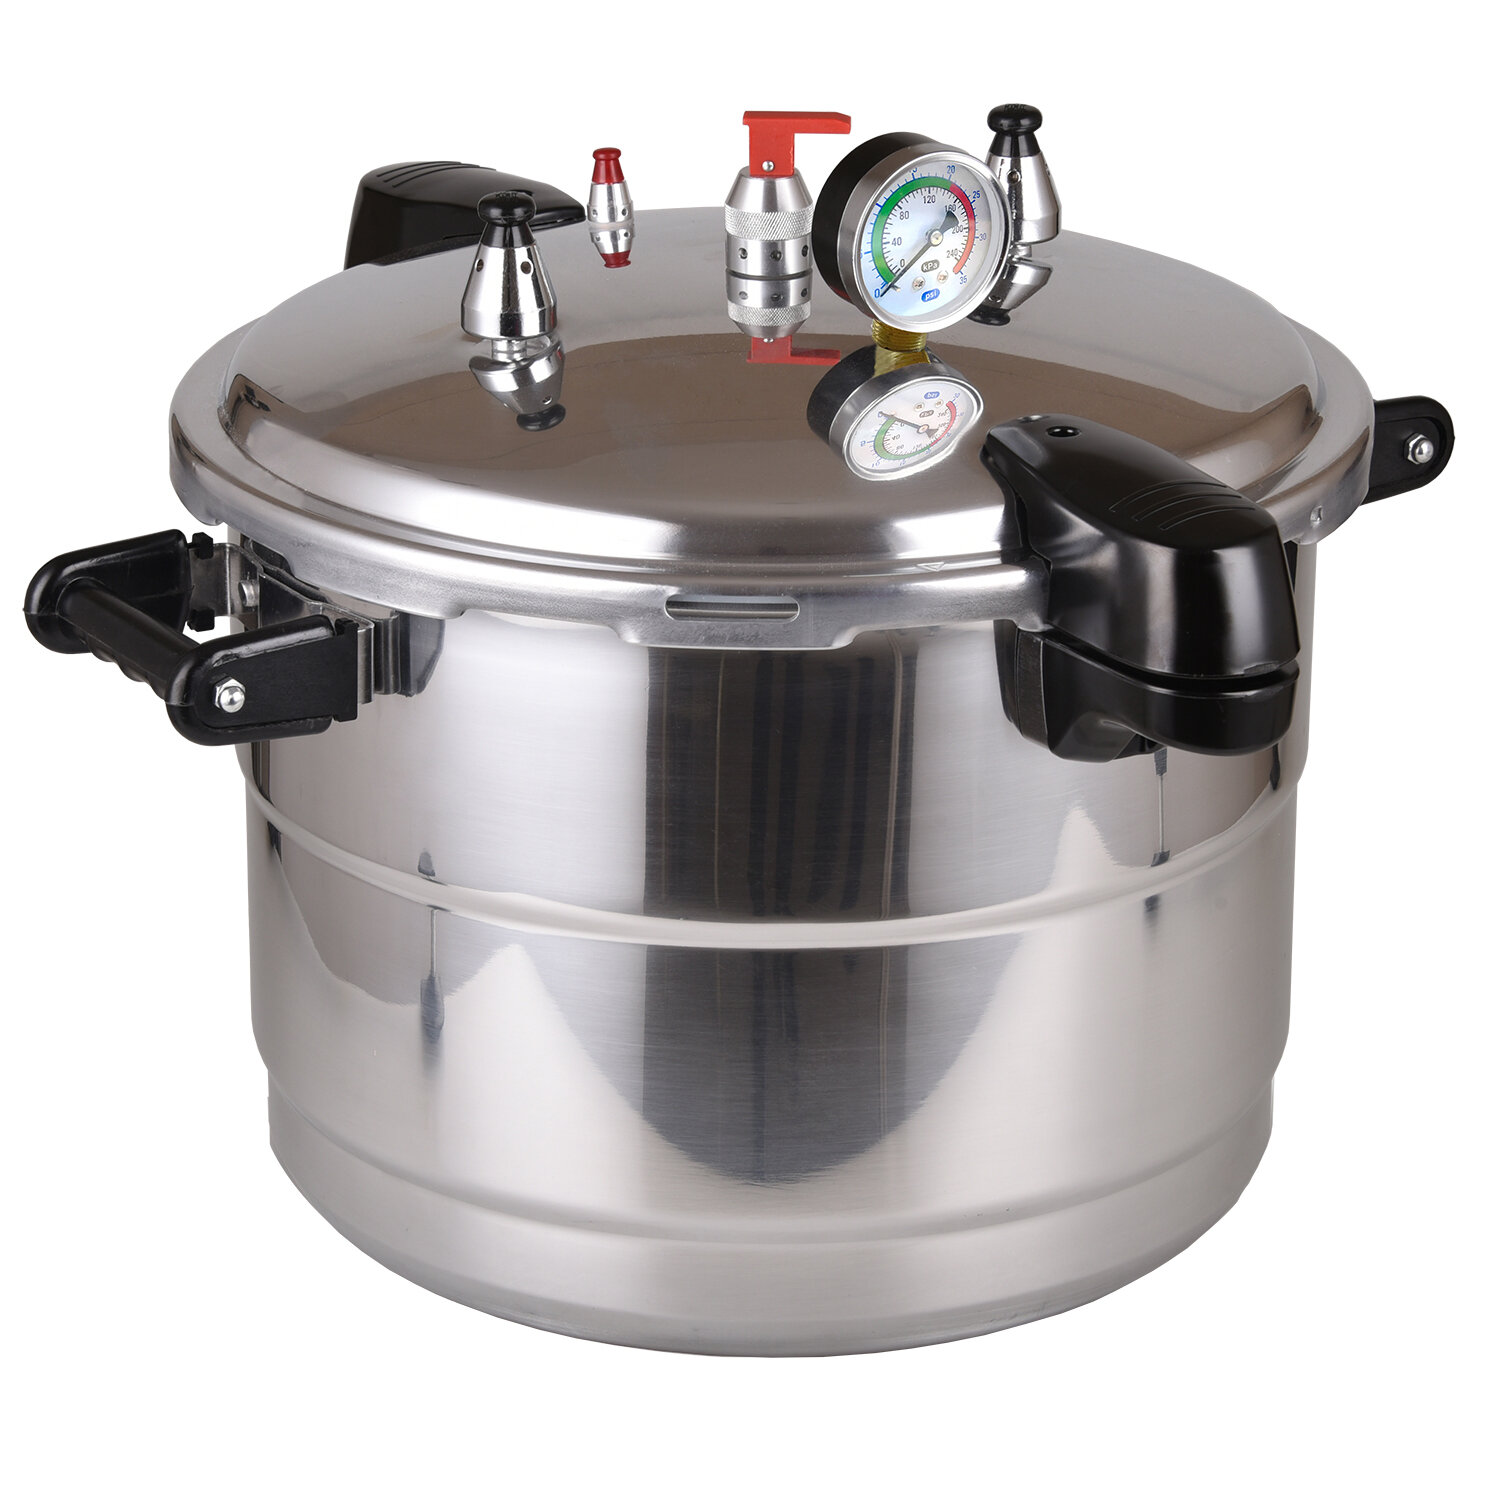 Quart Pressure Cooker,11.2 psi Aluminum Pressure Canner for Canning w/ Pressure Gauge for Home and Restaurant Steaming and Stewin - AliExpress